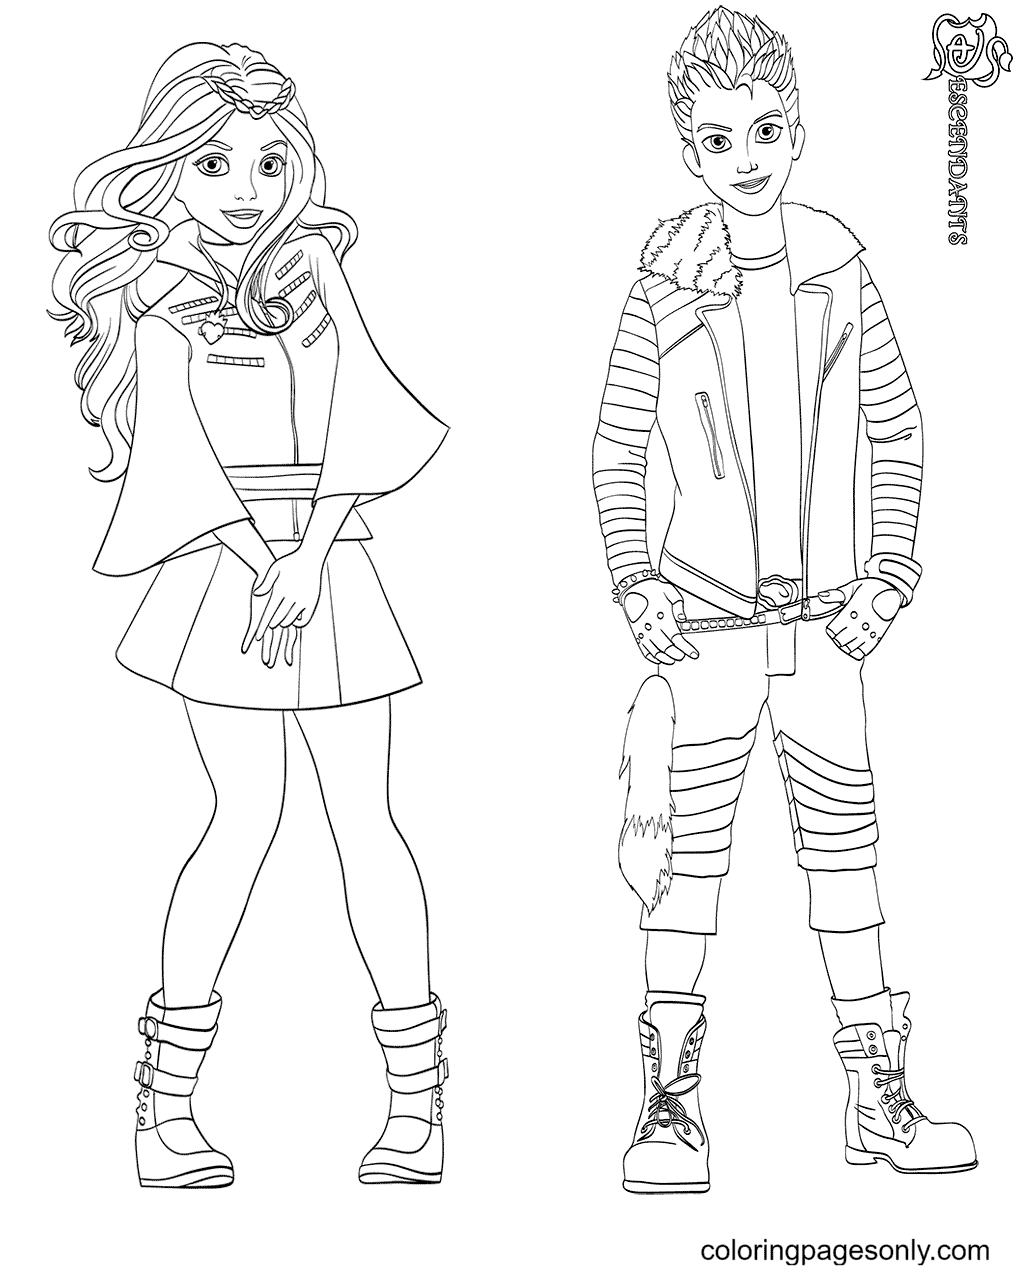 Carlos and Evie Coloring Page - Free Printable Coloring Pages